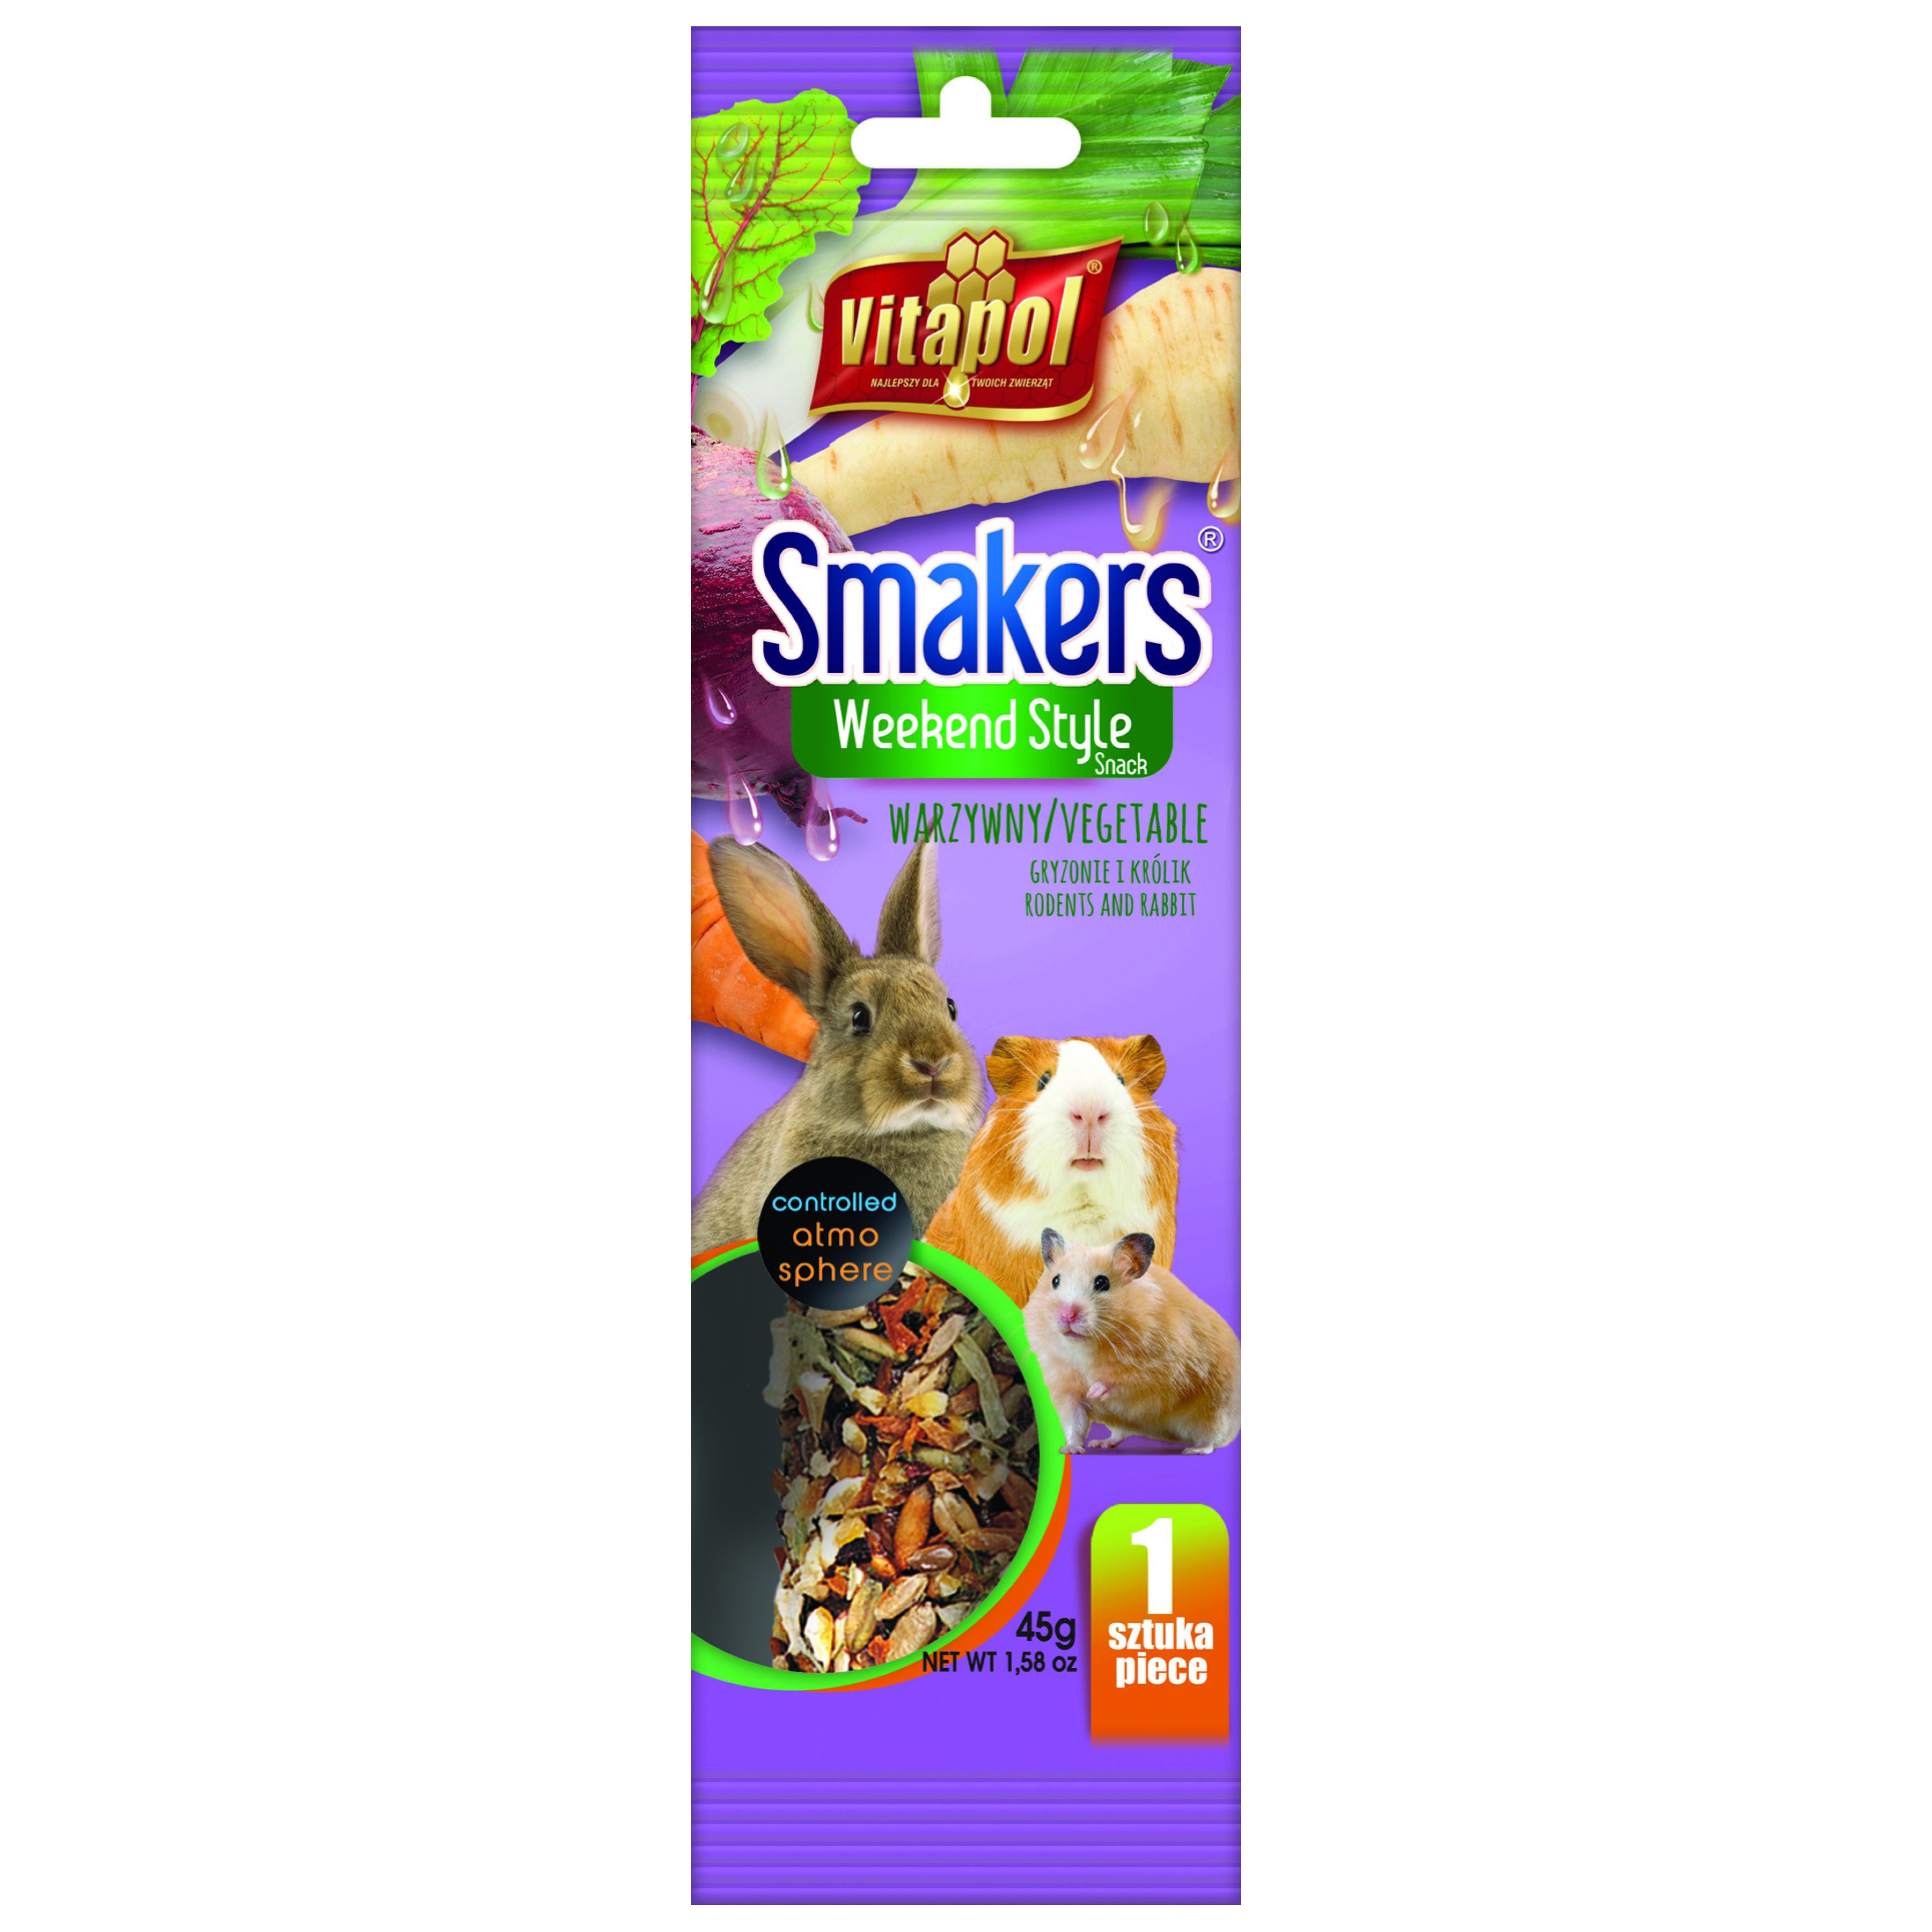 VITAPOL SMAKERS Weekend Style Warzywny/Vegetable 45g